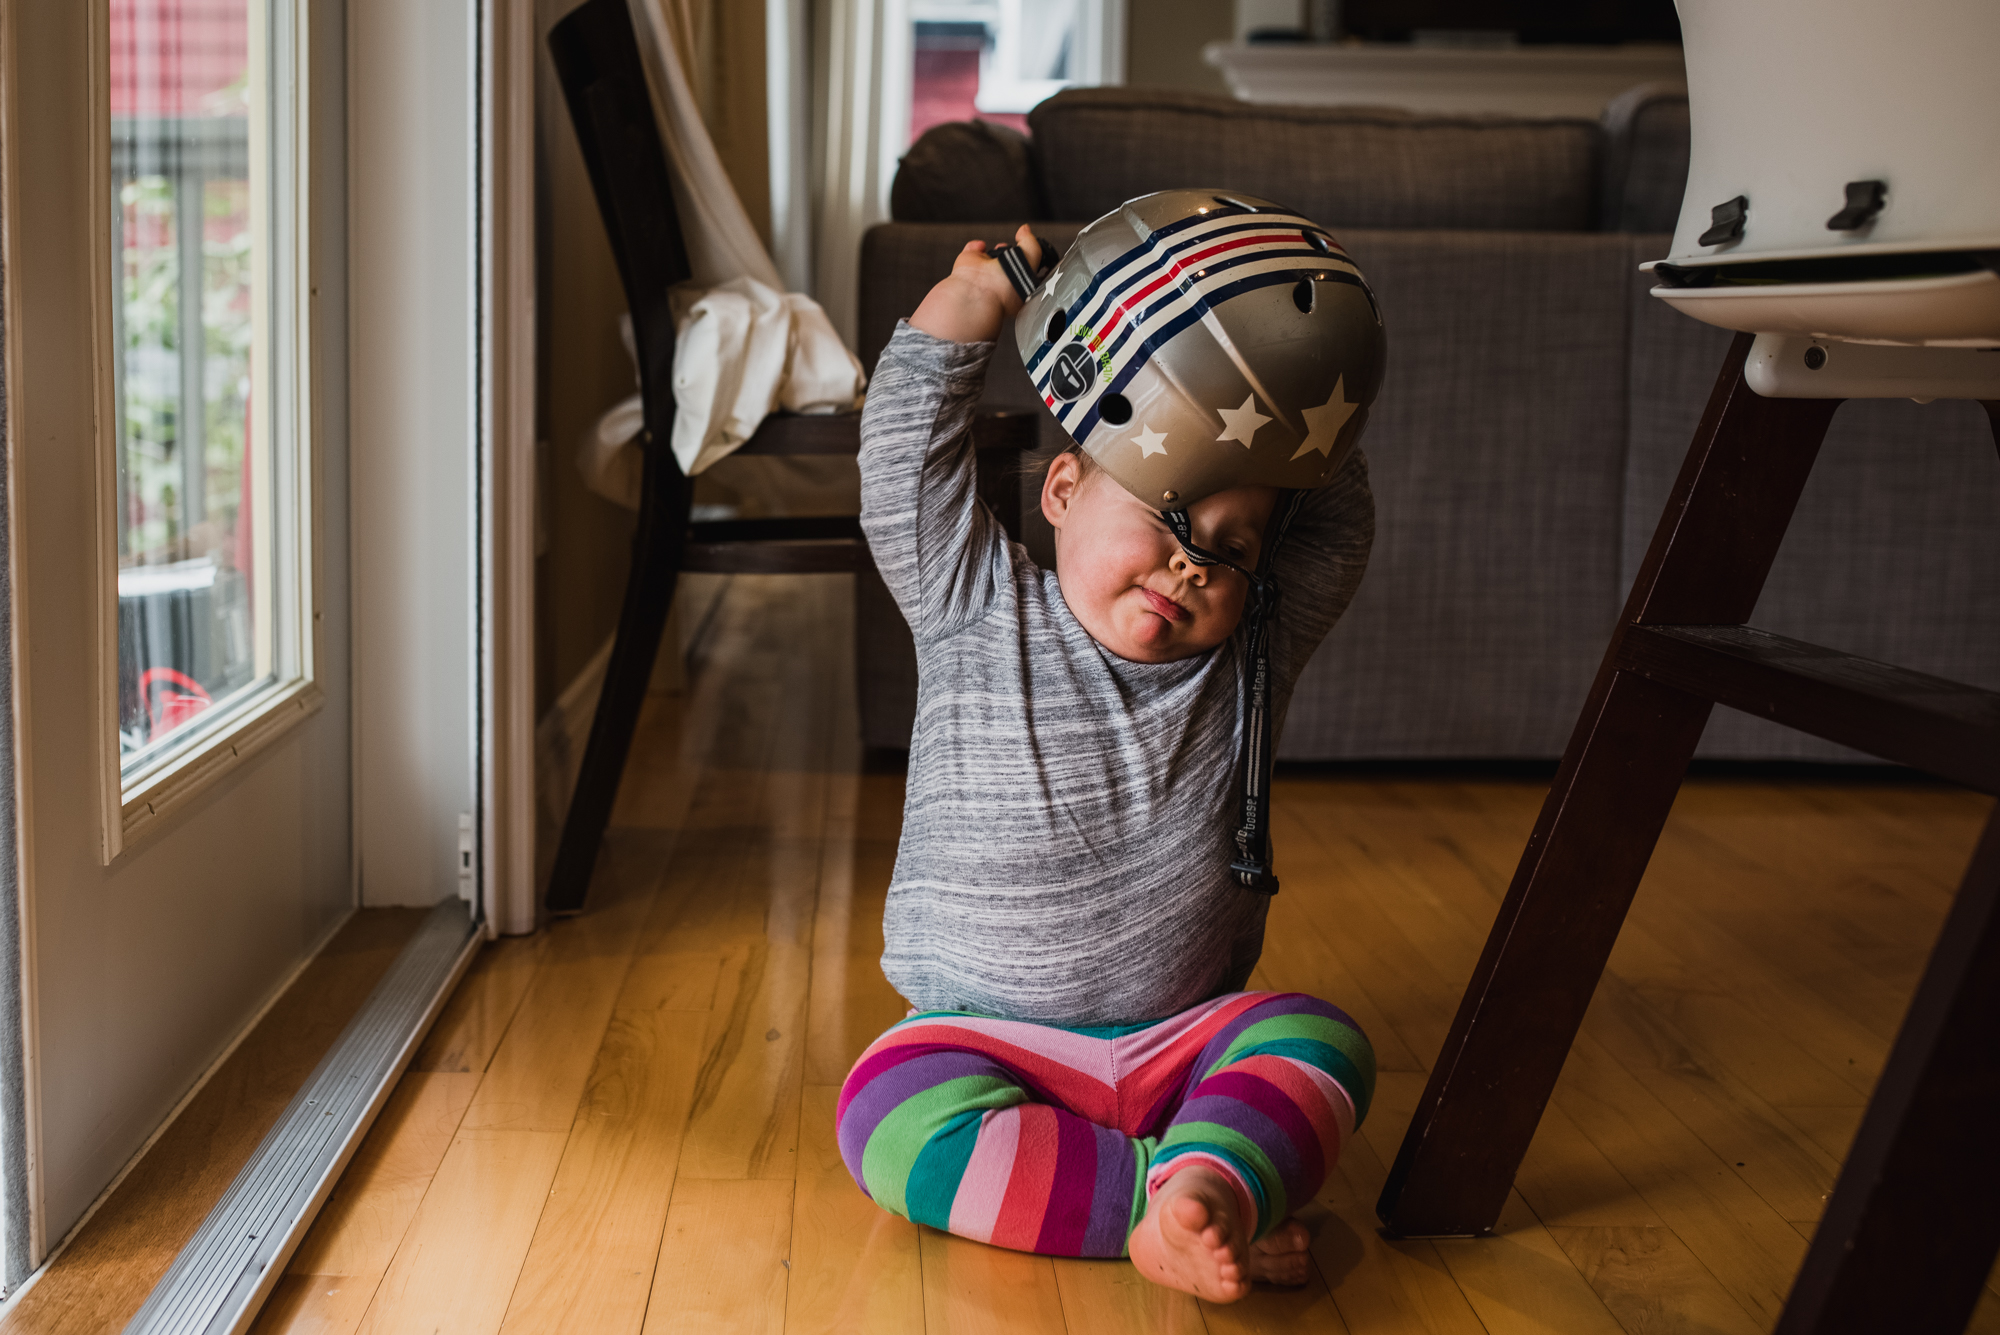 Toddler trying to remove a helmet off her head